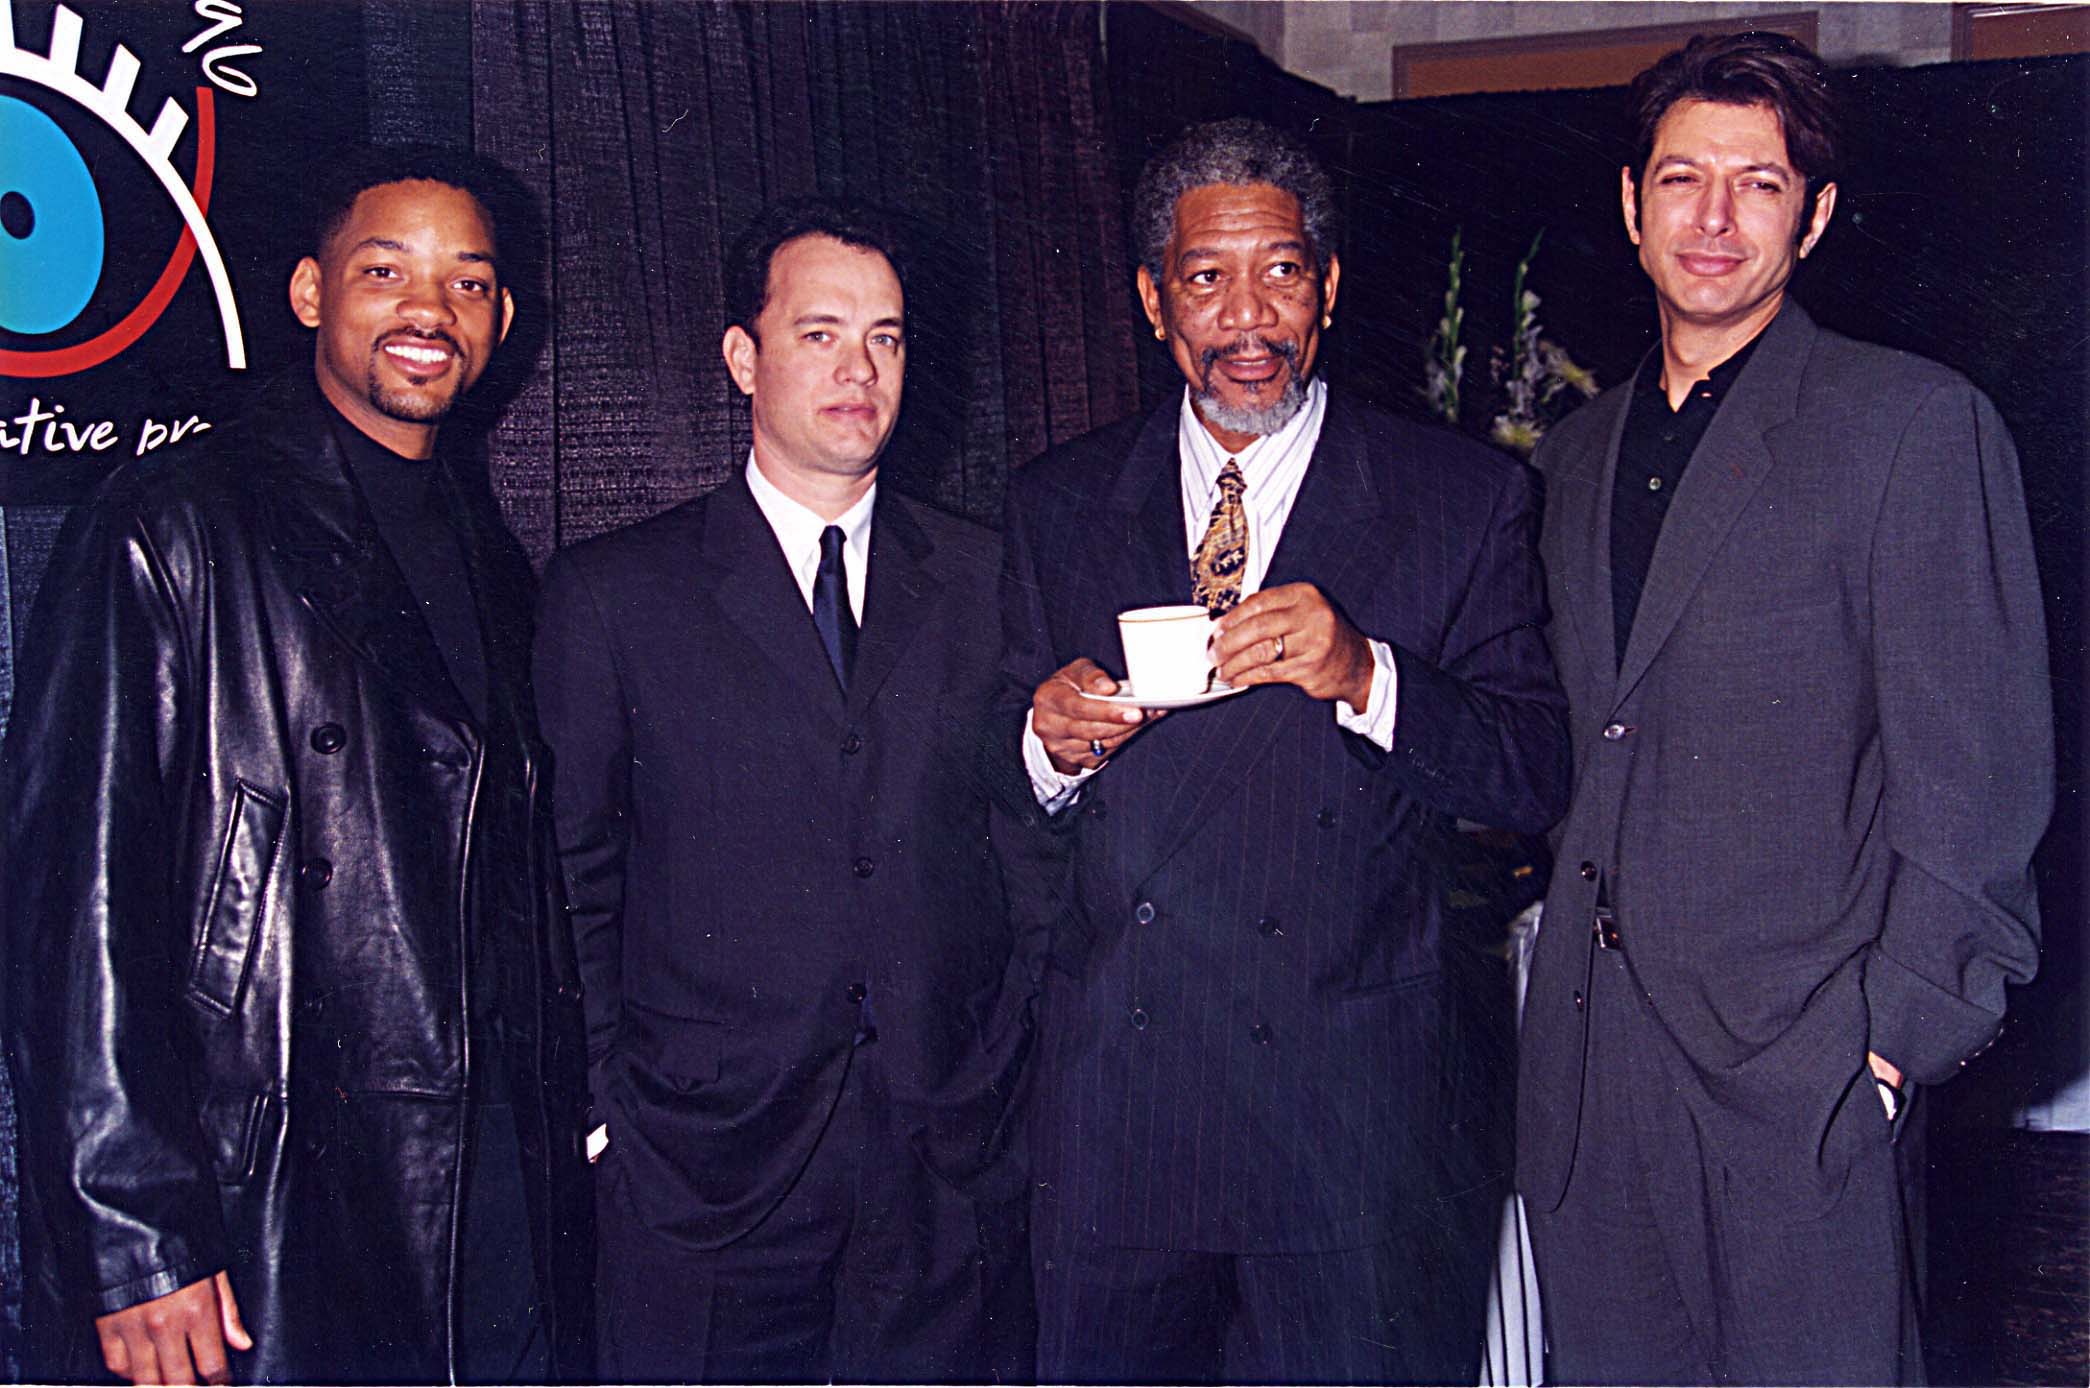 Will Smith, Tom Hanks, Morgan Freeman, and Jeff Goldblum, a few actors from 'Independence Day,' standing in suits together